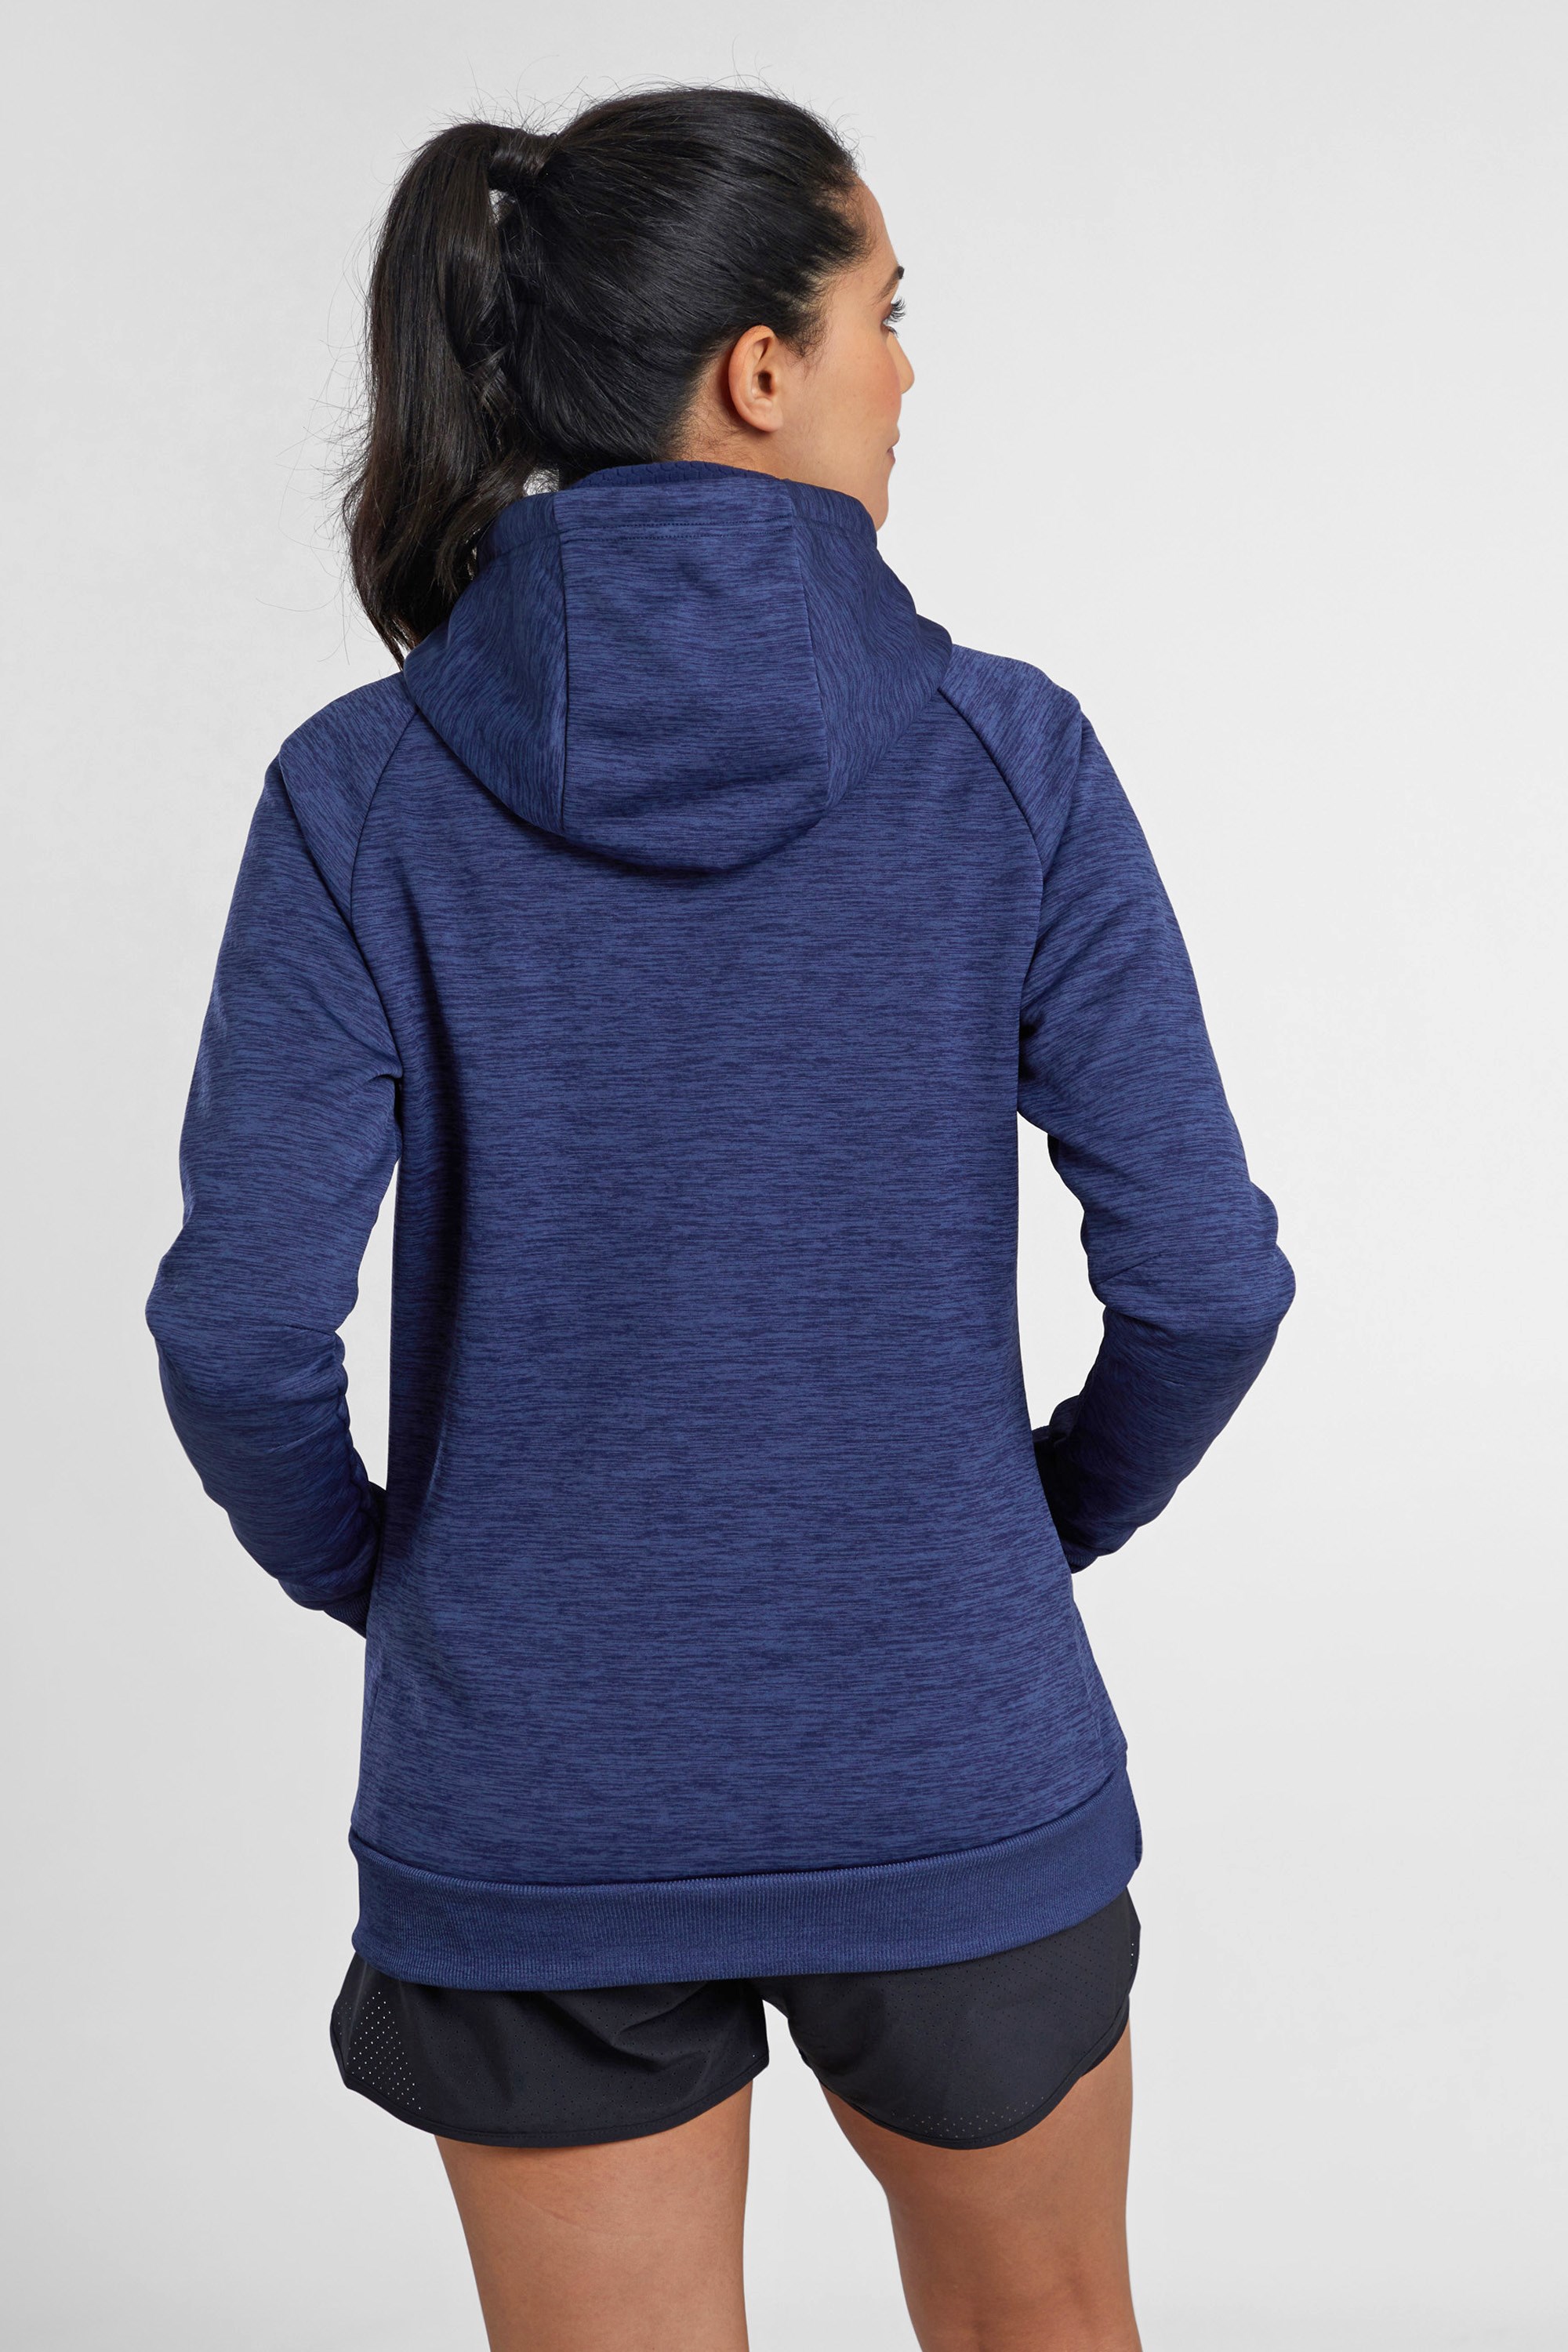 Blue Mountain Warehouse Fleece Breathable Ladies in Navy Womens Clothing Jumpers and knitwear Zipped sweaters 